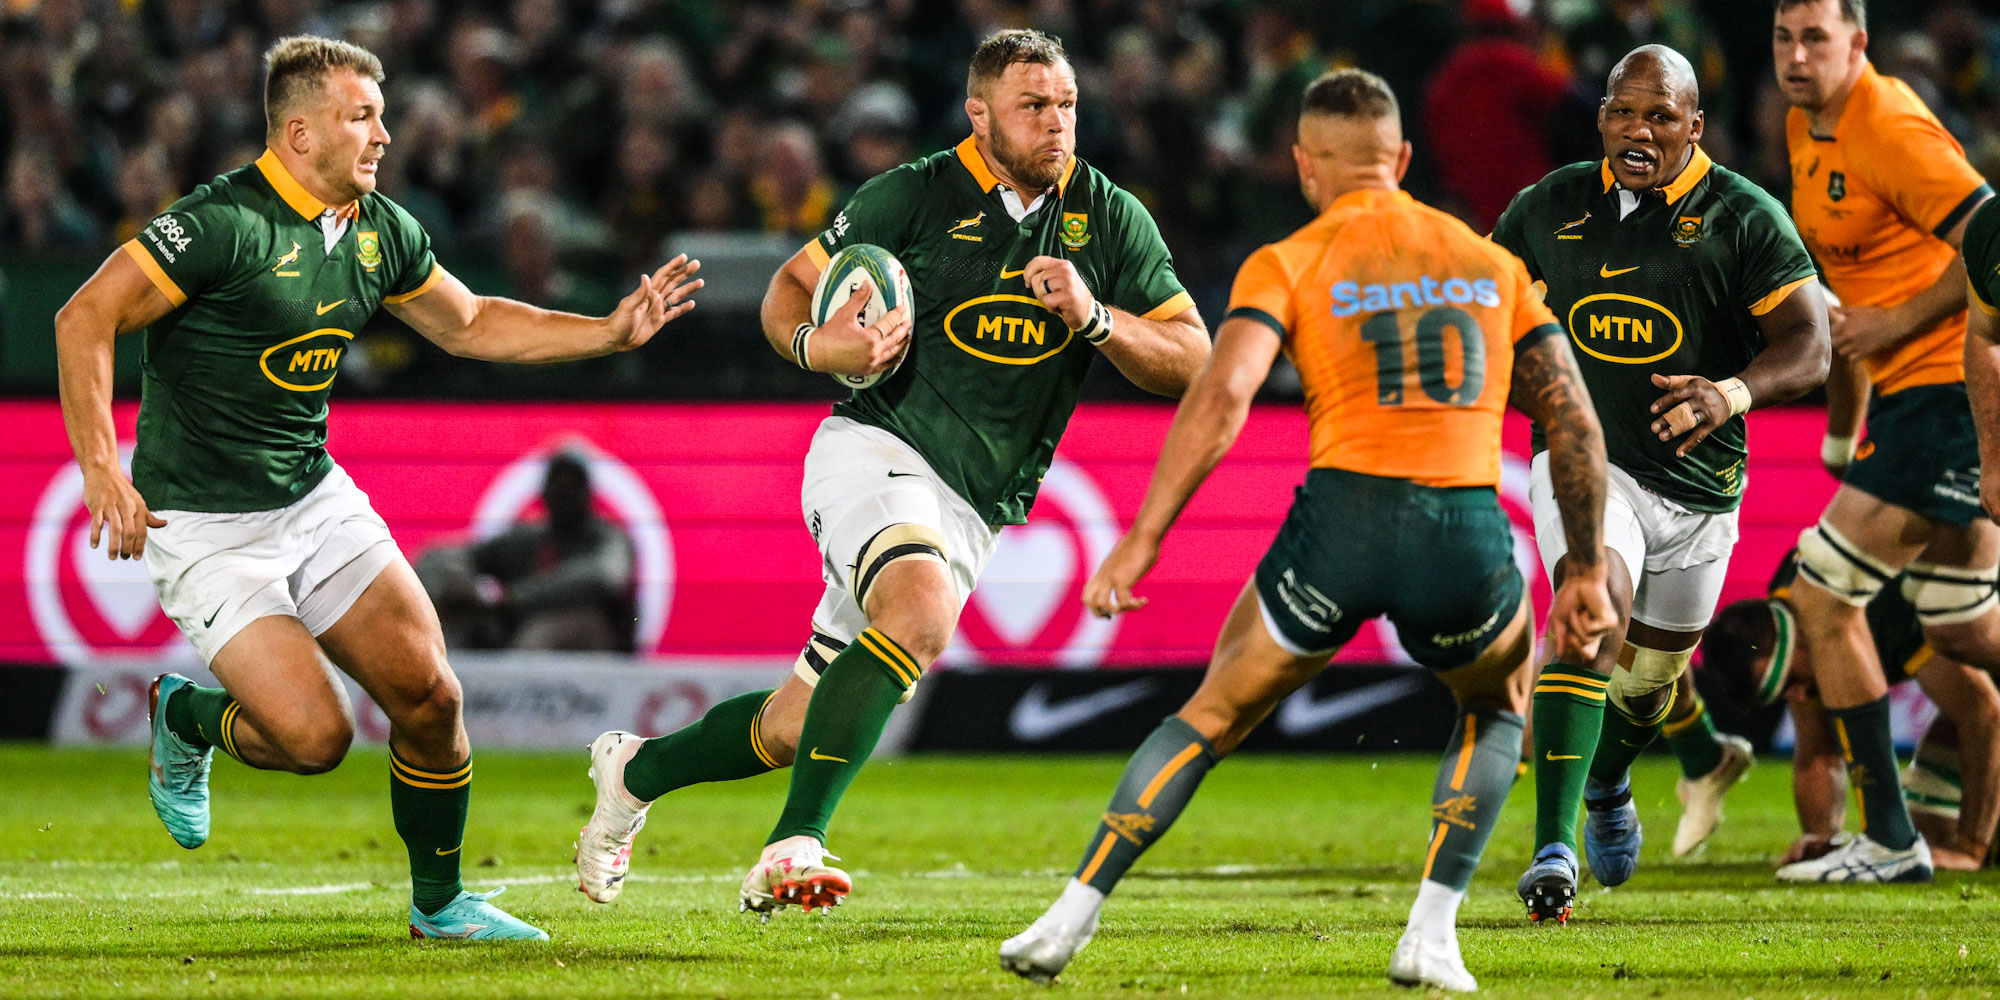 Duane Vermeulen on the charge in his third Test as Springbok captain.